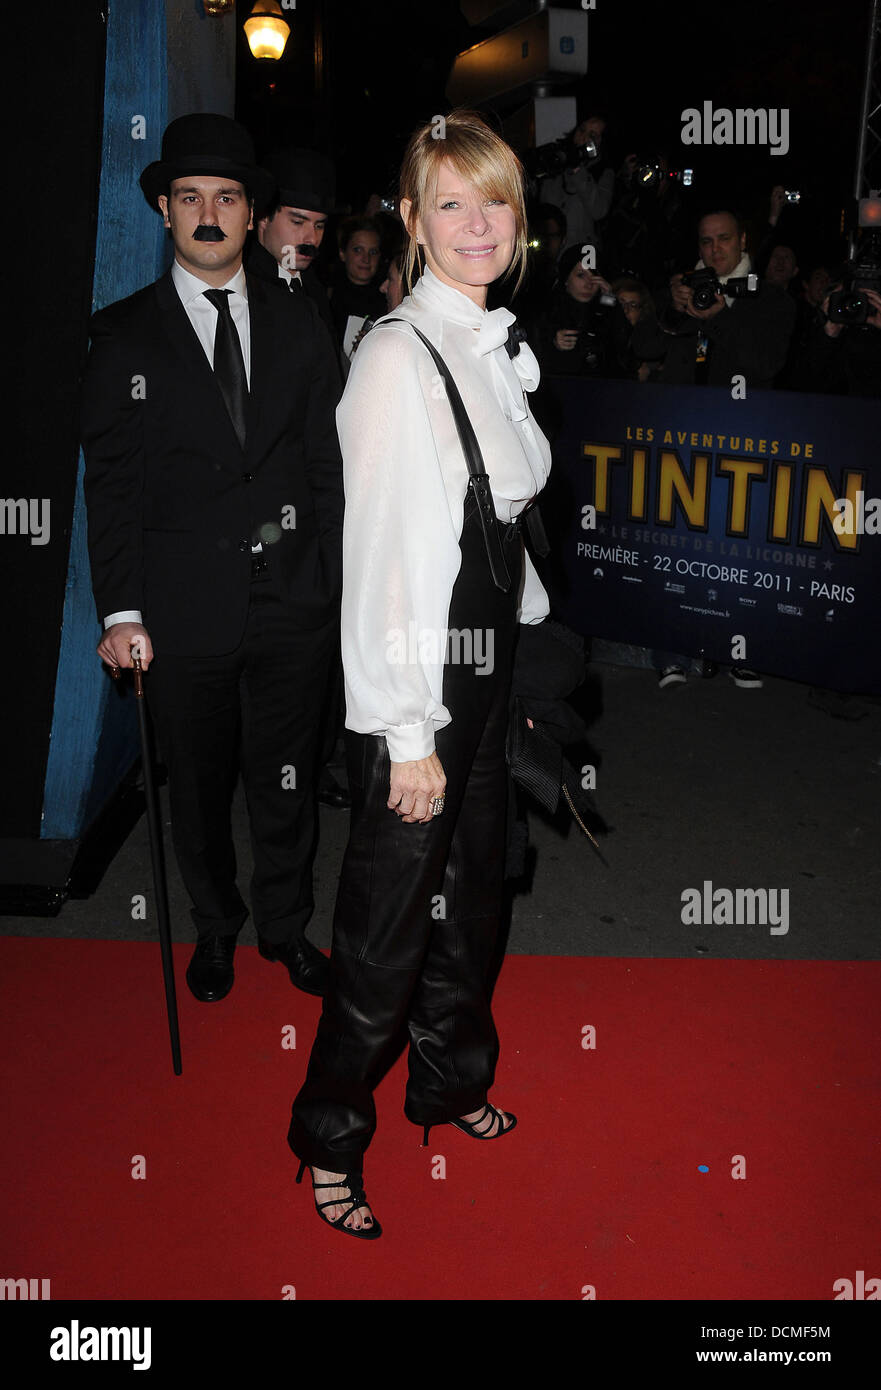 Kate Capshaw   French premiere of  'The Adventures of Tintin: The Secret of the Unicorn' held at Le Grand Rex  Paris, France - 22.10.11 Stock Photo